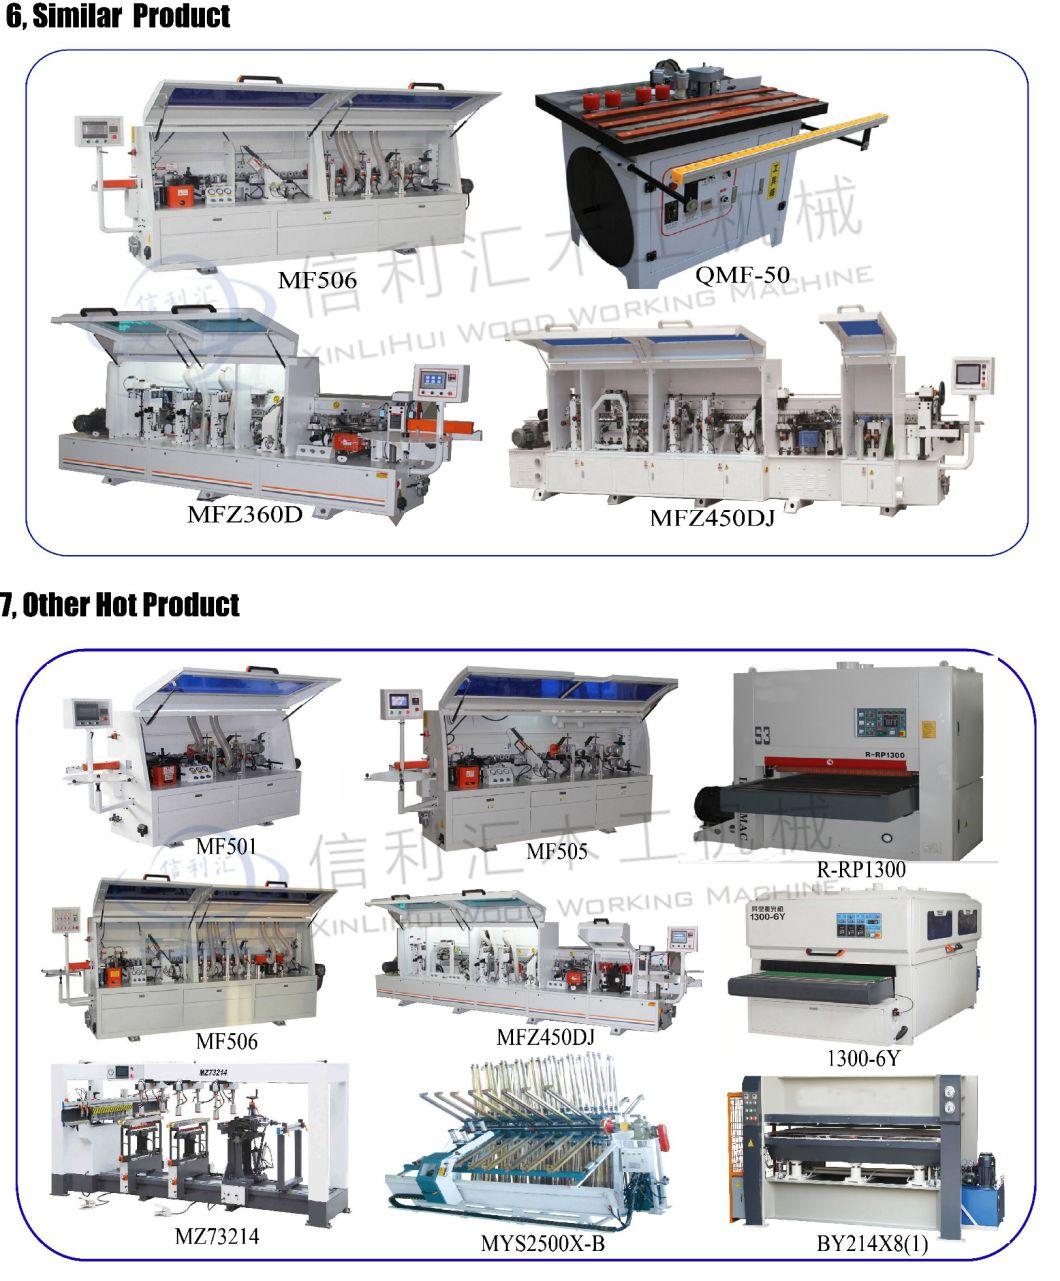 Veneer Shearing Machine Other Woodworking Machine/ Wood Skin Slicer/ Slicing Machine Woodworking Machine Venner Clipper